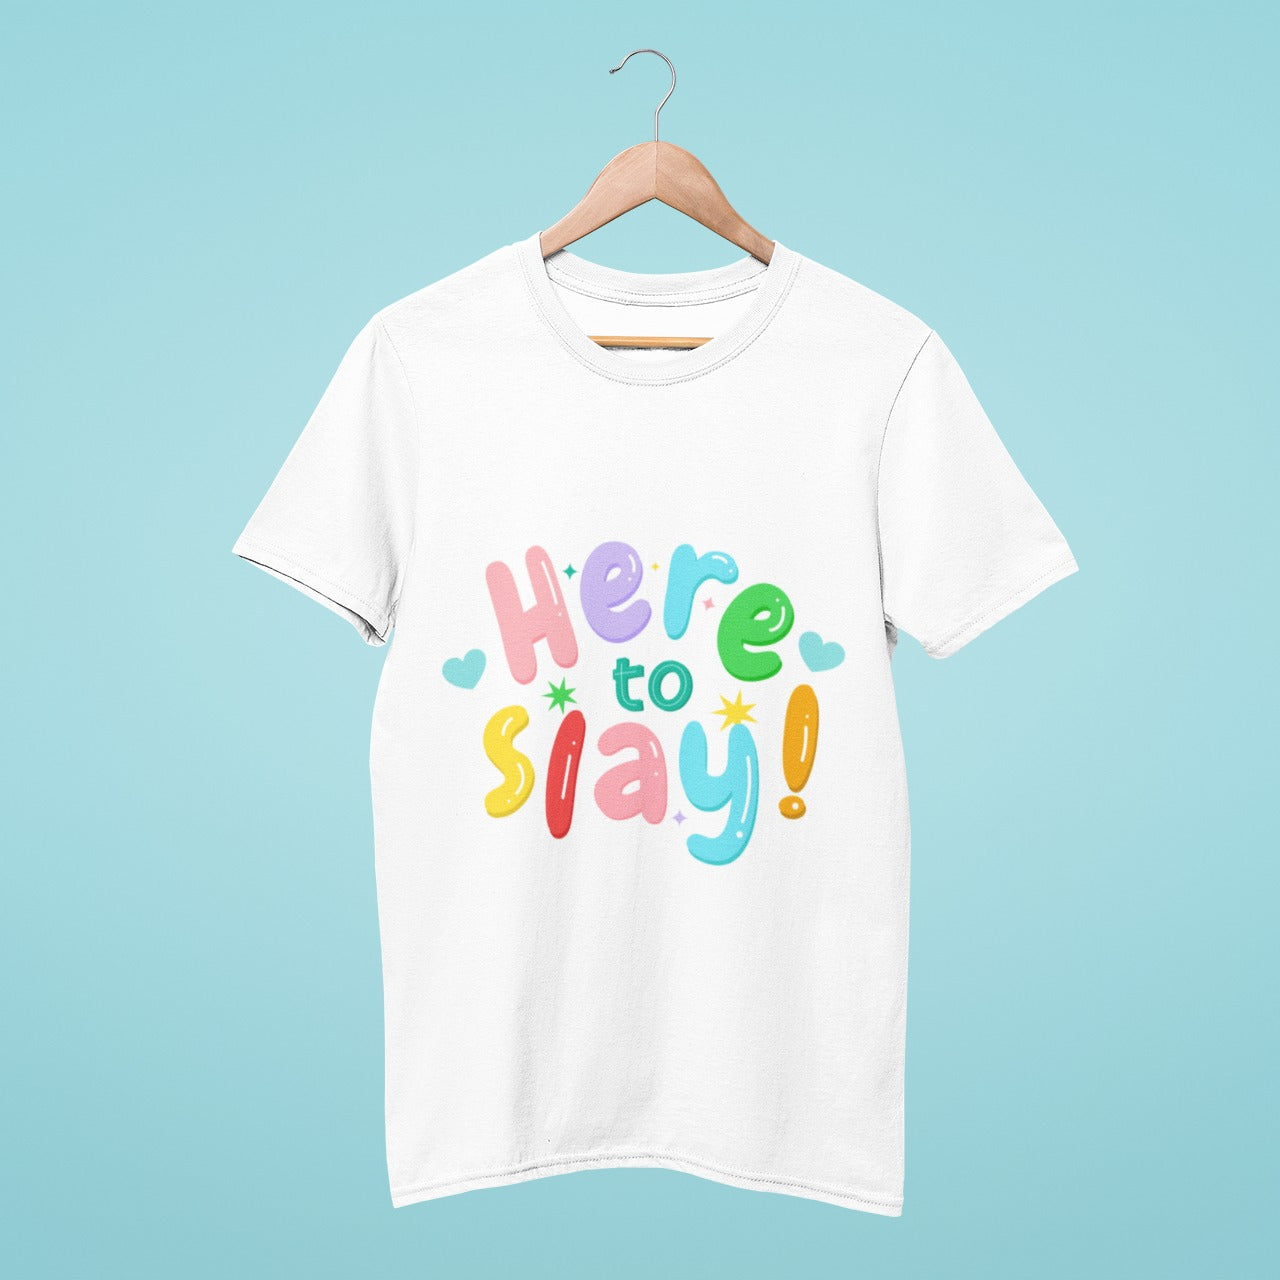 "Here to Slay" in playful colorful letters is proudly displayed on this white t-shirt. Stand out from the crowd and show off your unique personality with this eye-catching and fun design. Perfect for a casual day out or a statement piece at your next pride event.